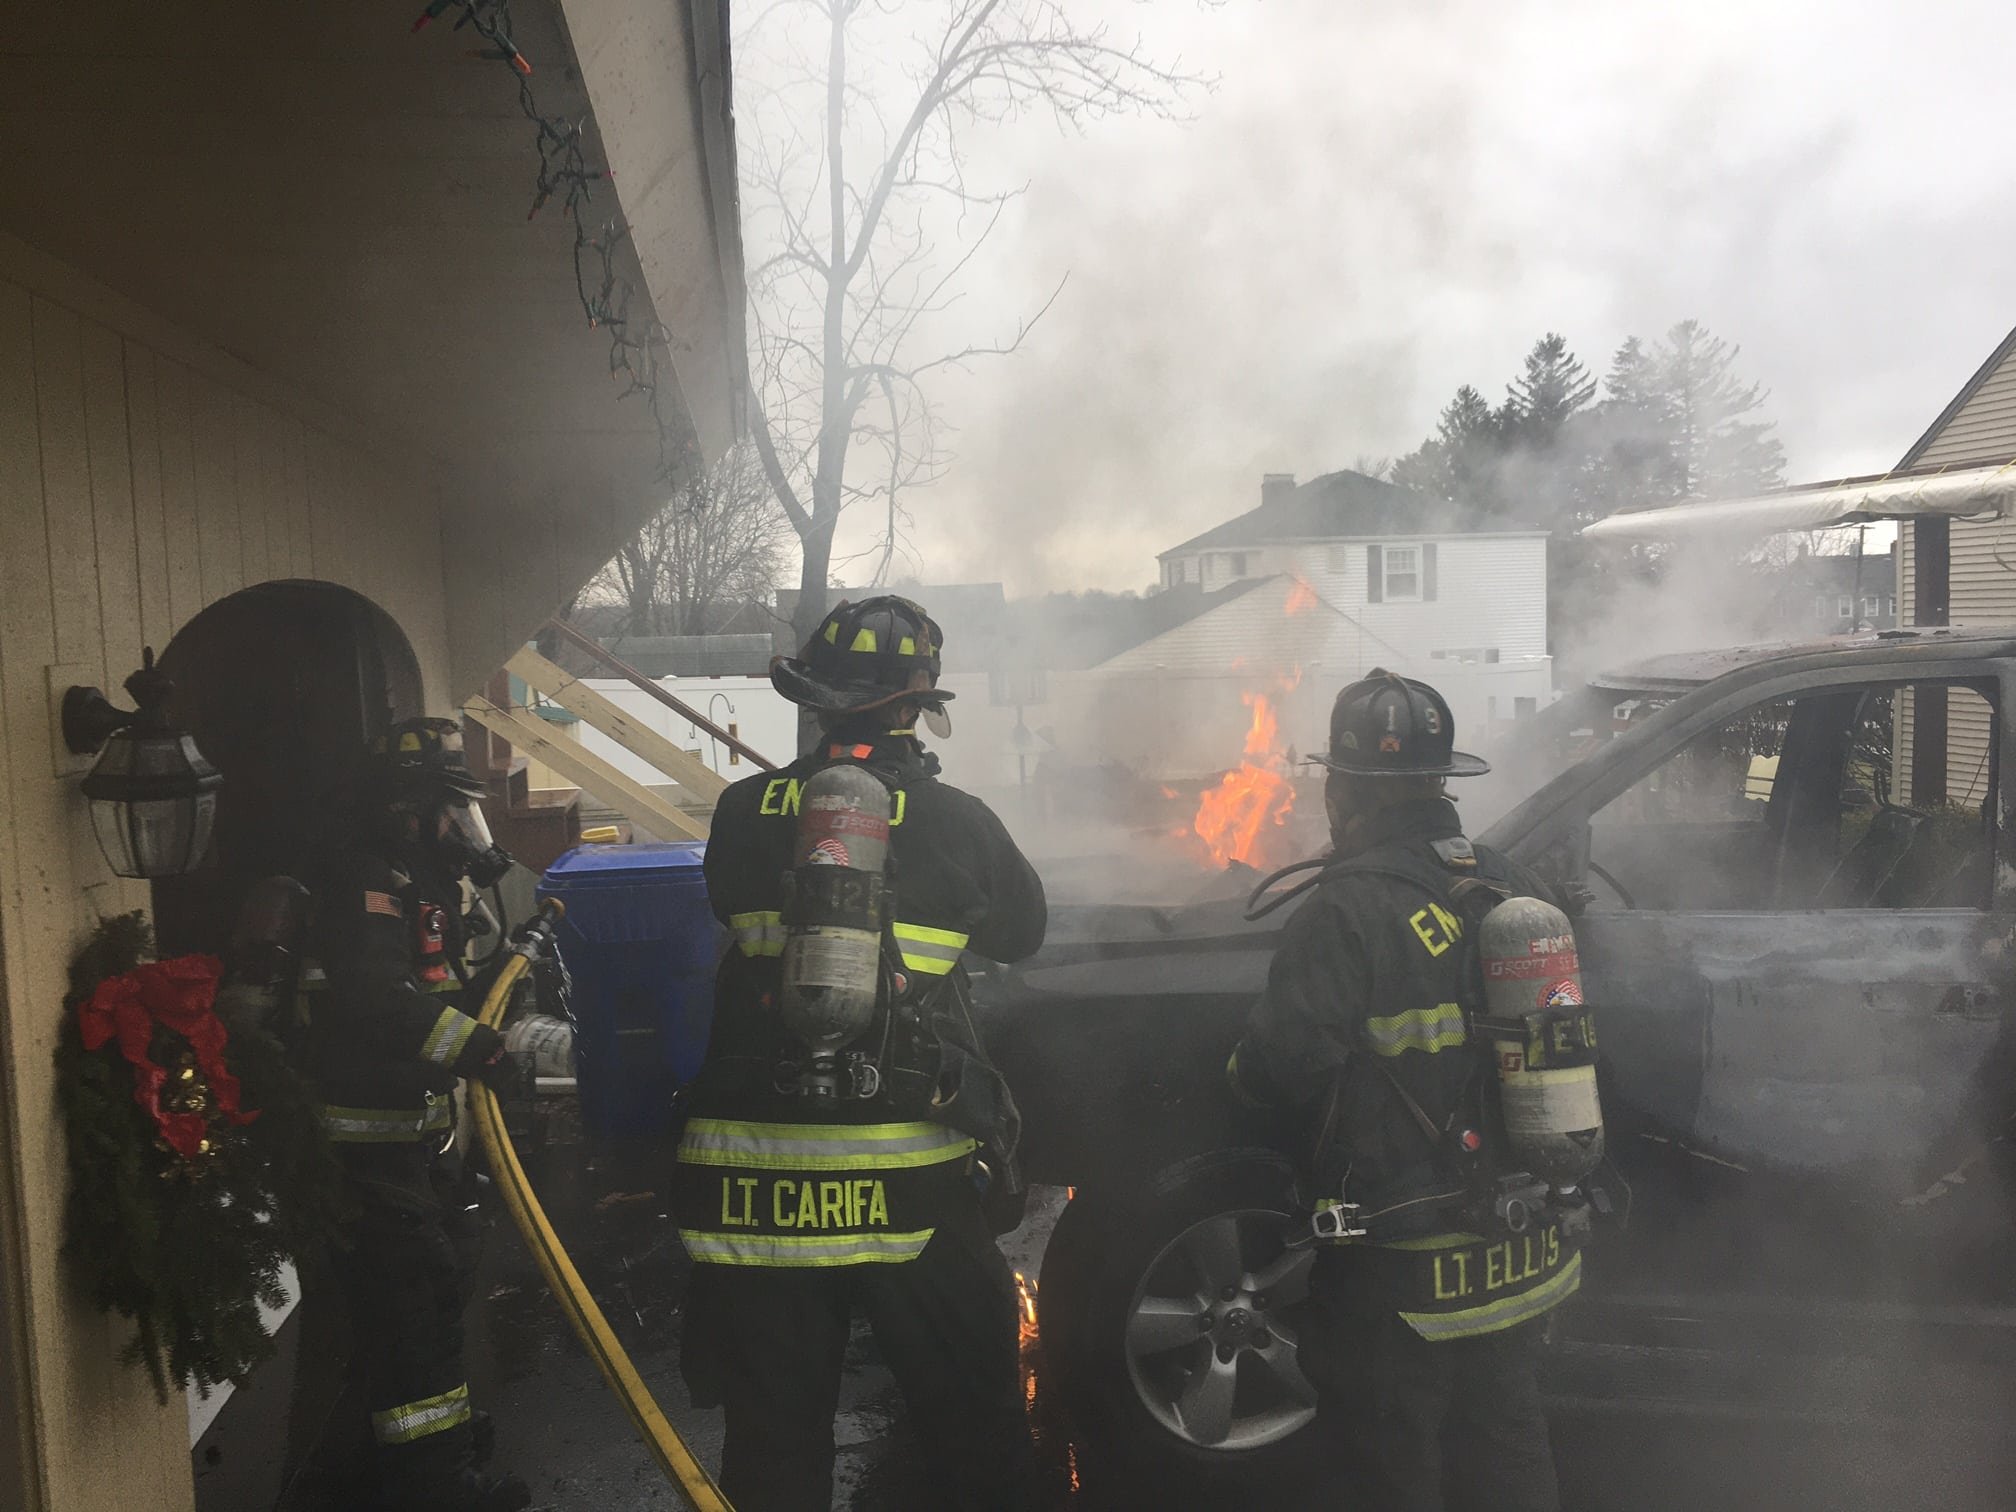 Deputy Chief William Higgins reports that Enfield Fire District No. 1 extinguished a pickup truck fire earlier today. (Photo courtesy Enfield Fire District)